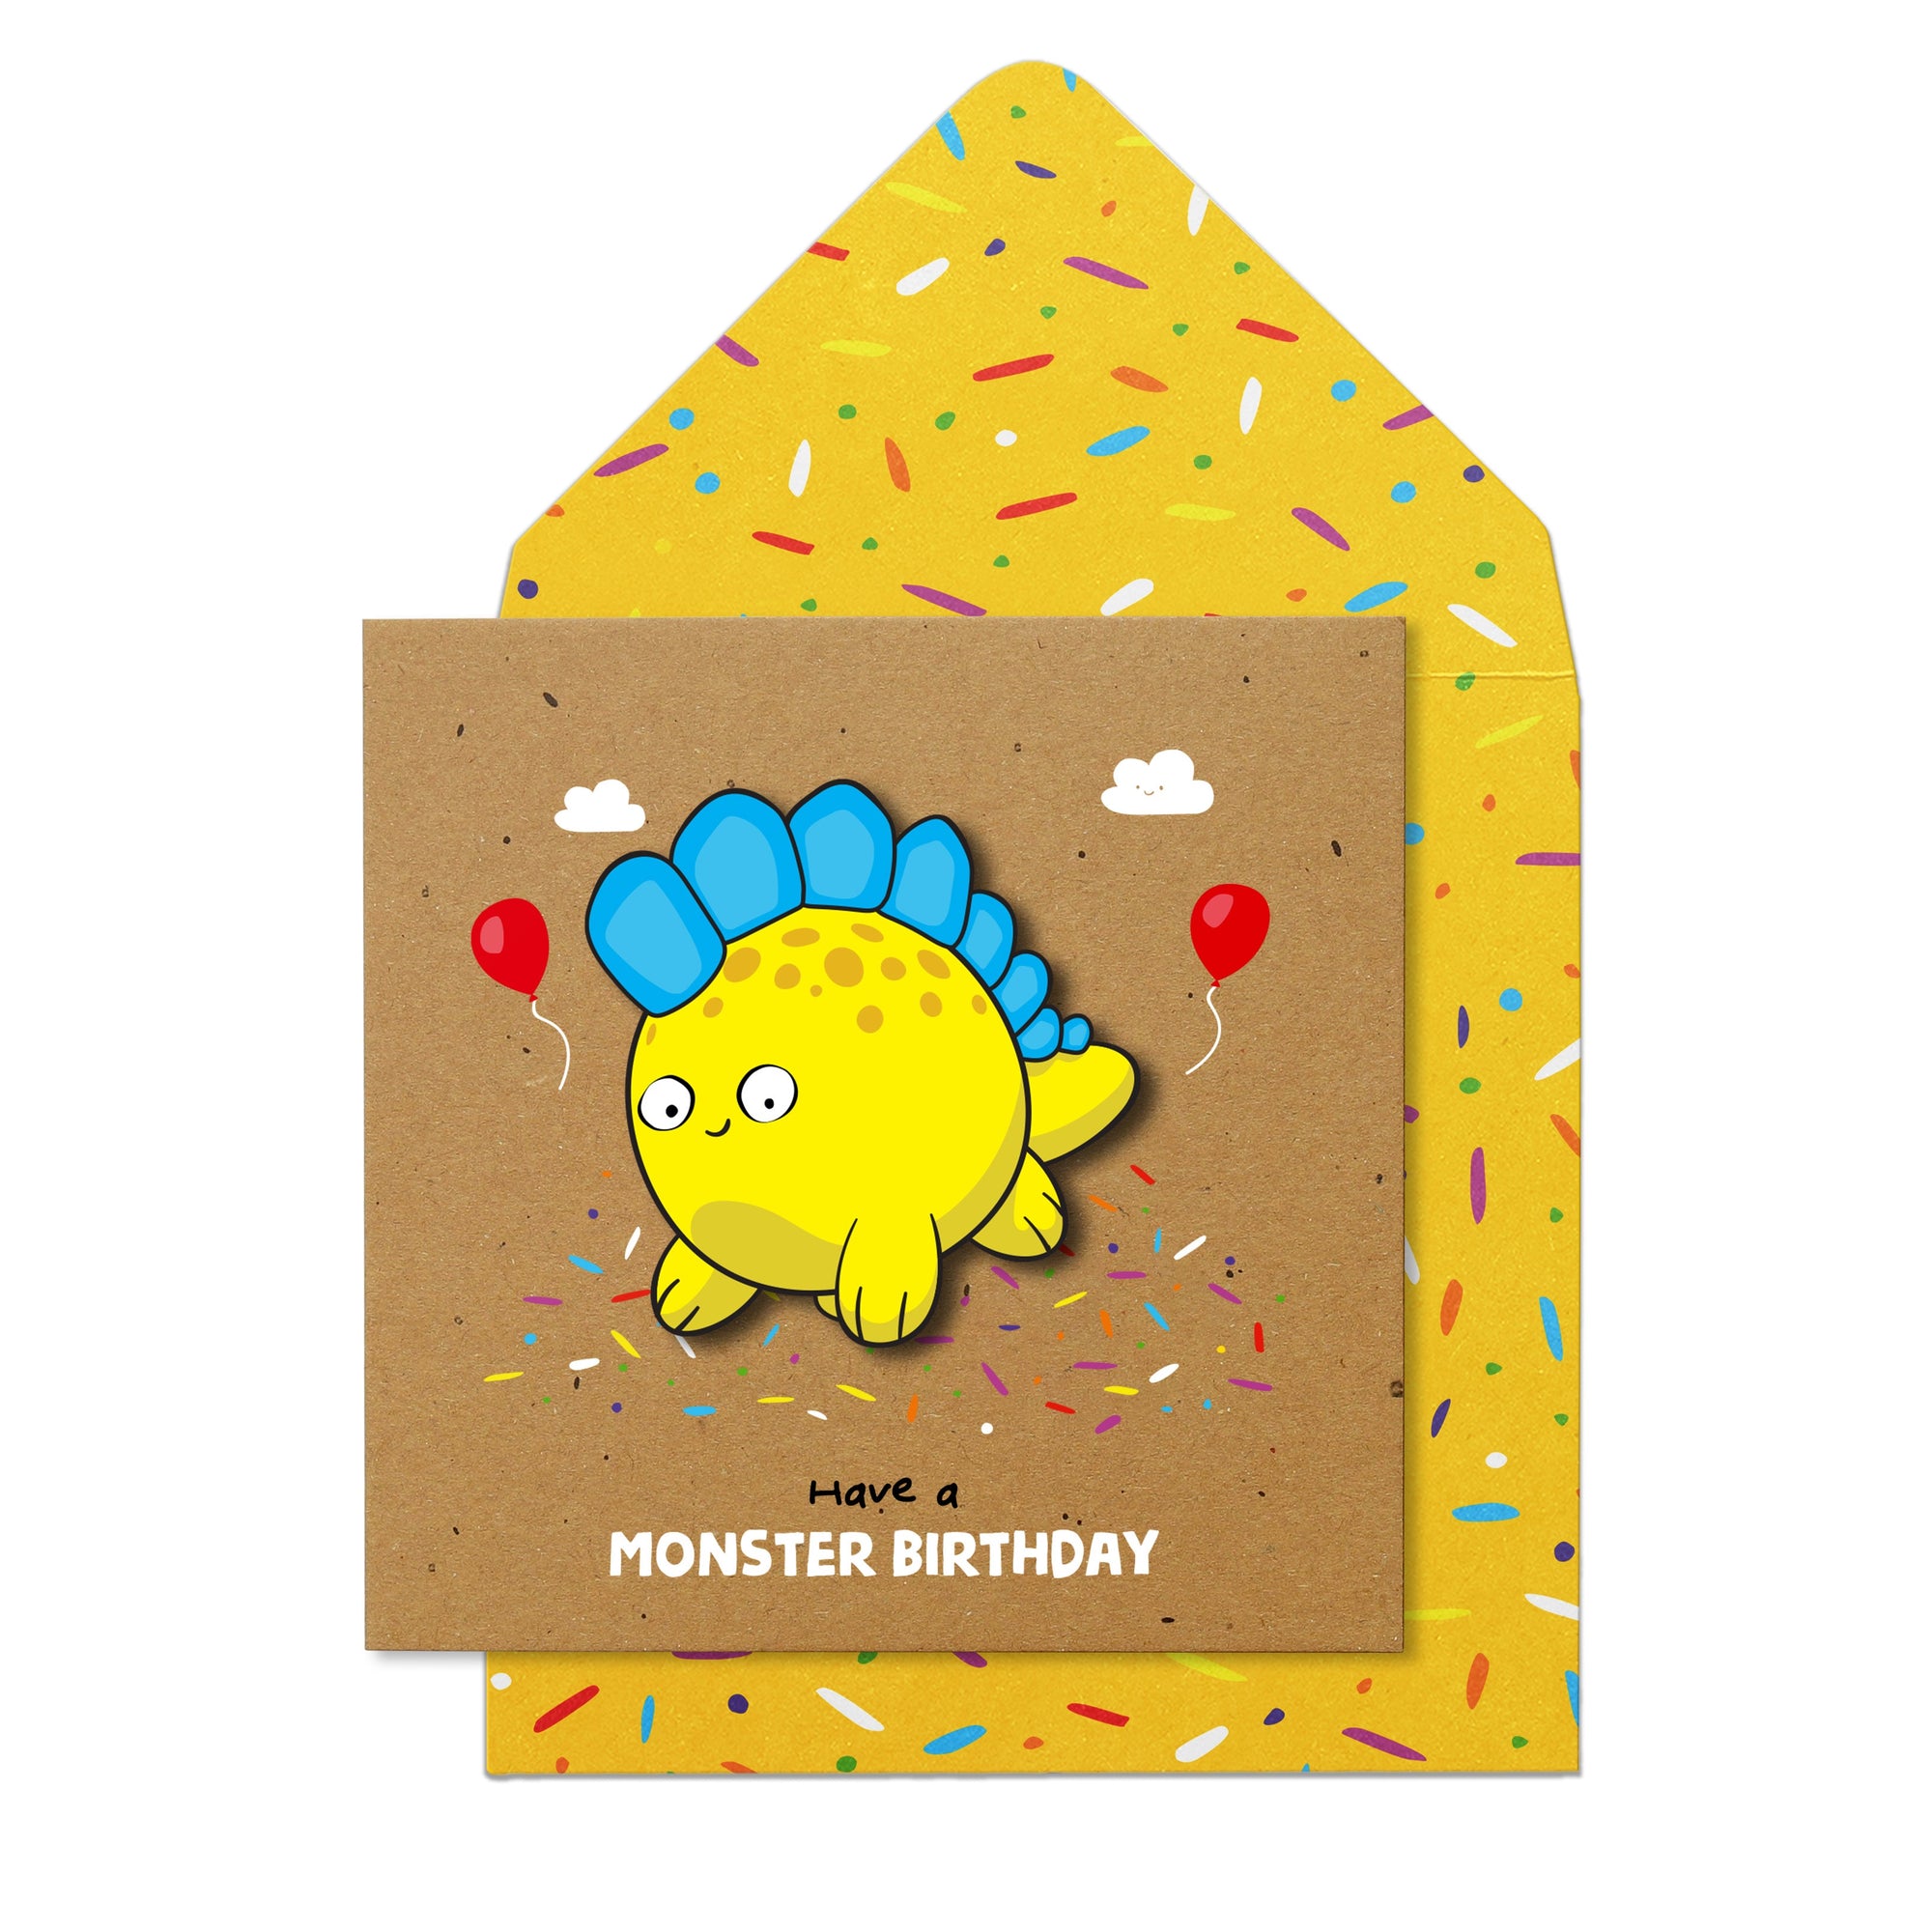 Have a Monster Birthday